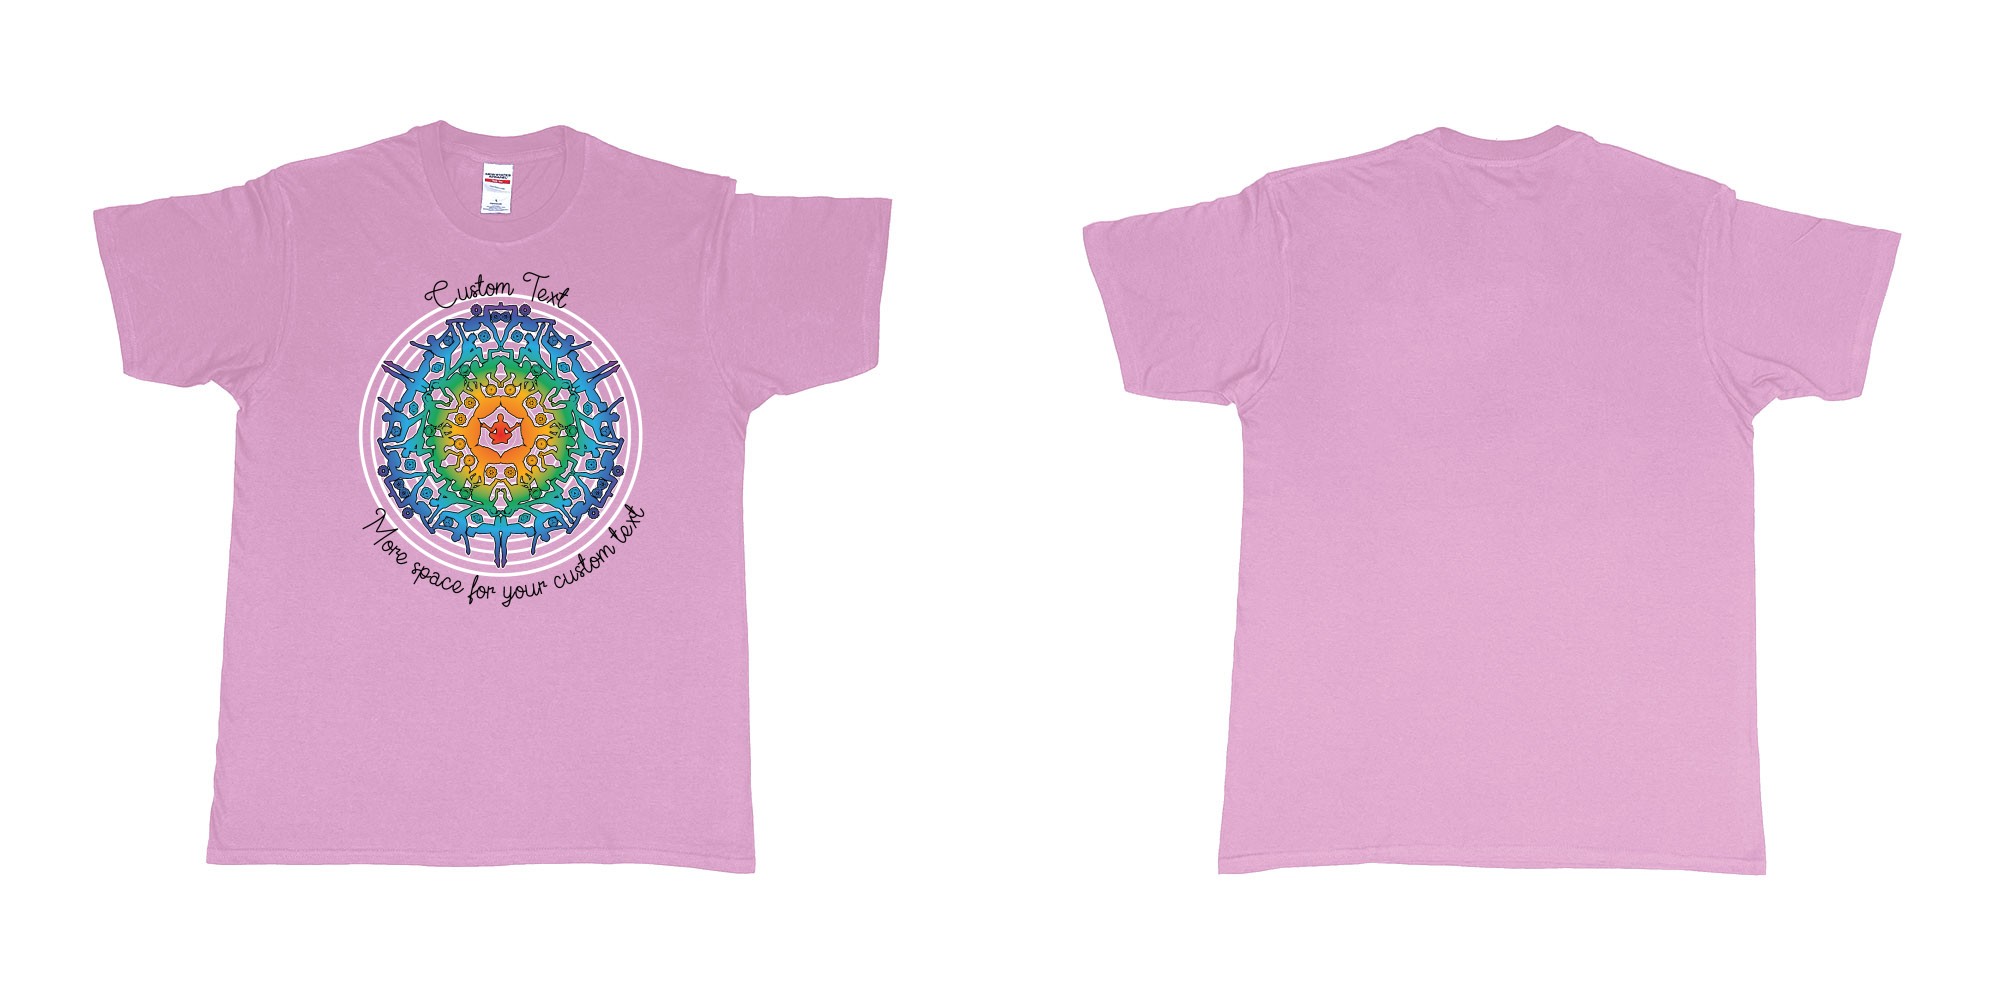 Custom tshirt design yoga mandala in fabric color light-pink choice your own text made in Bali by The Pirate Way